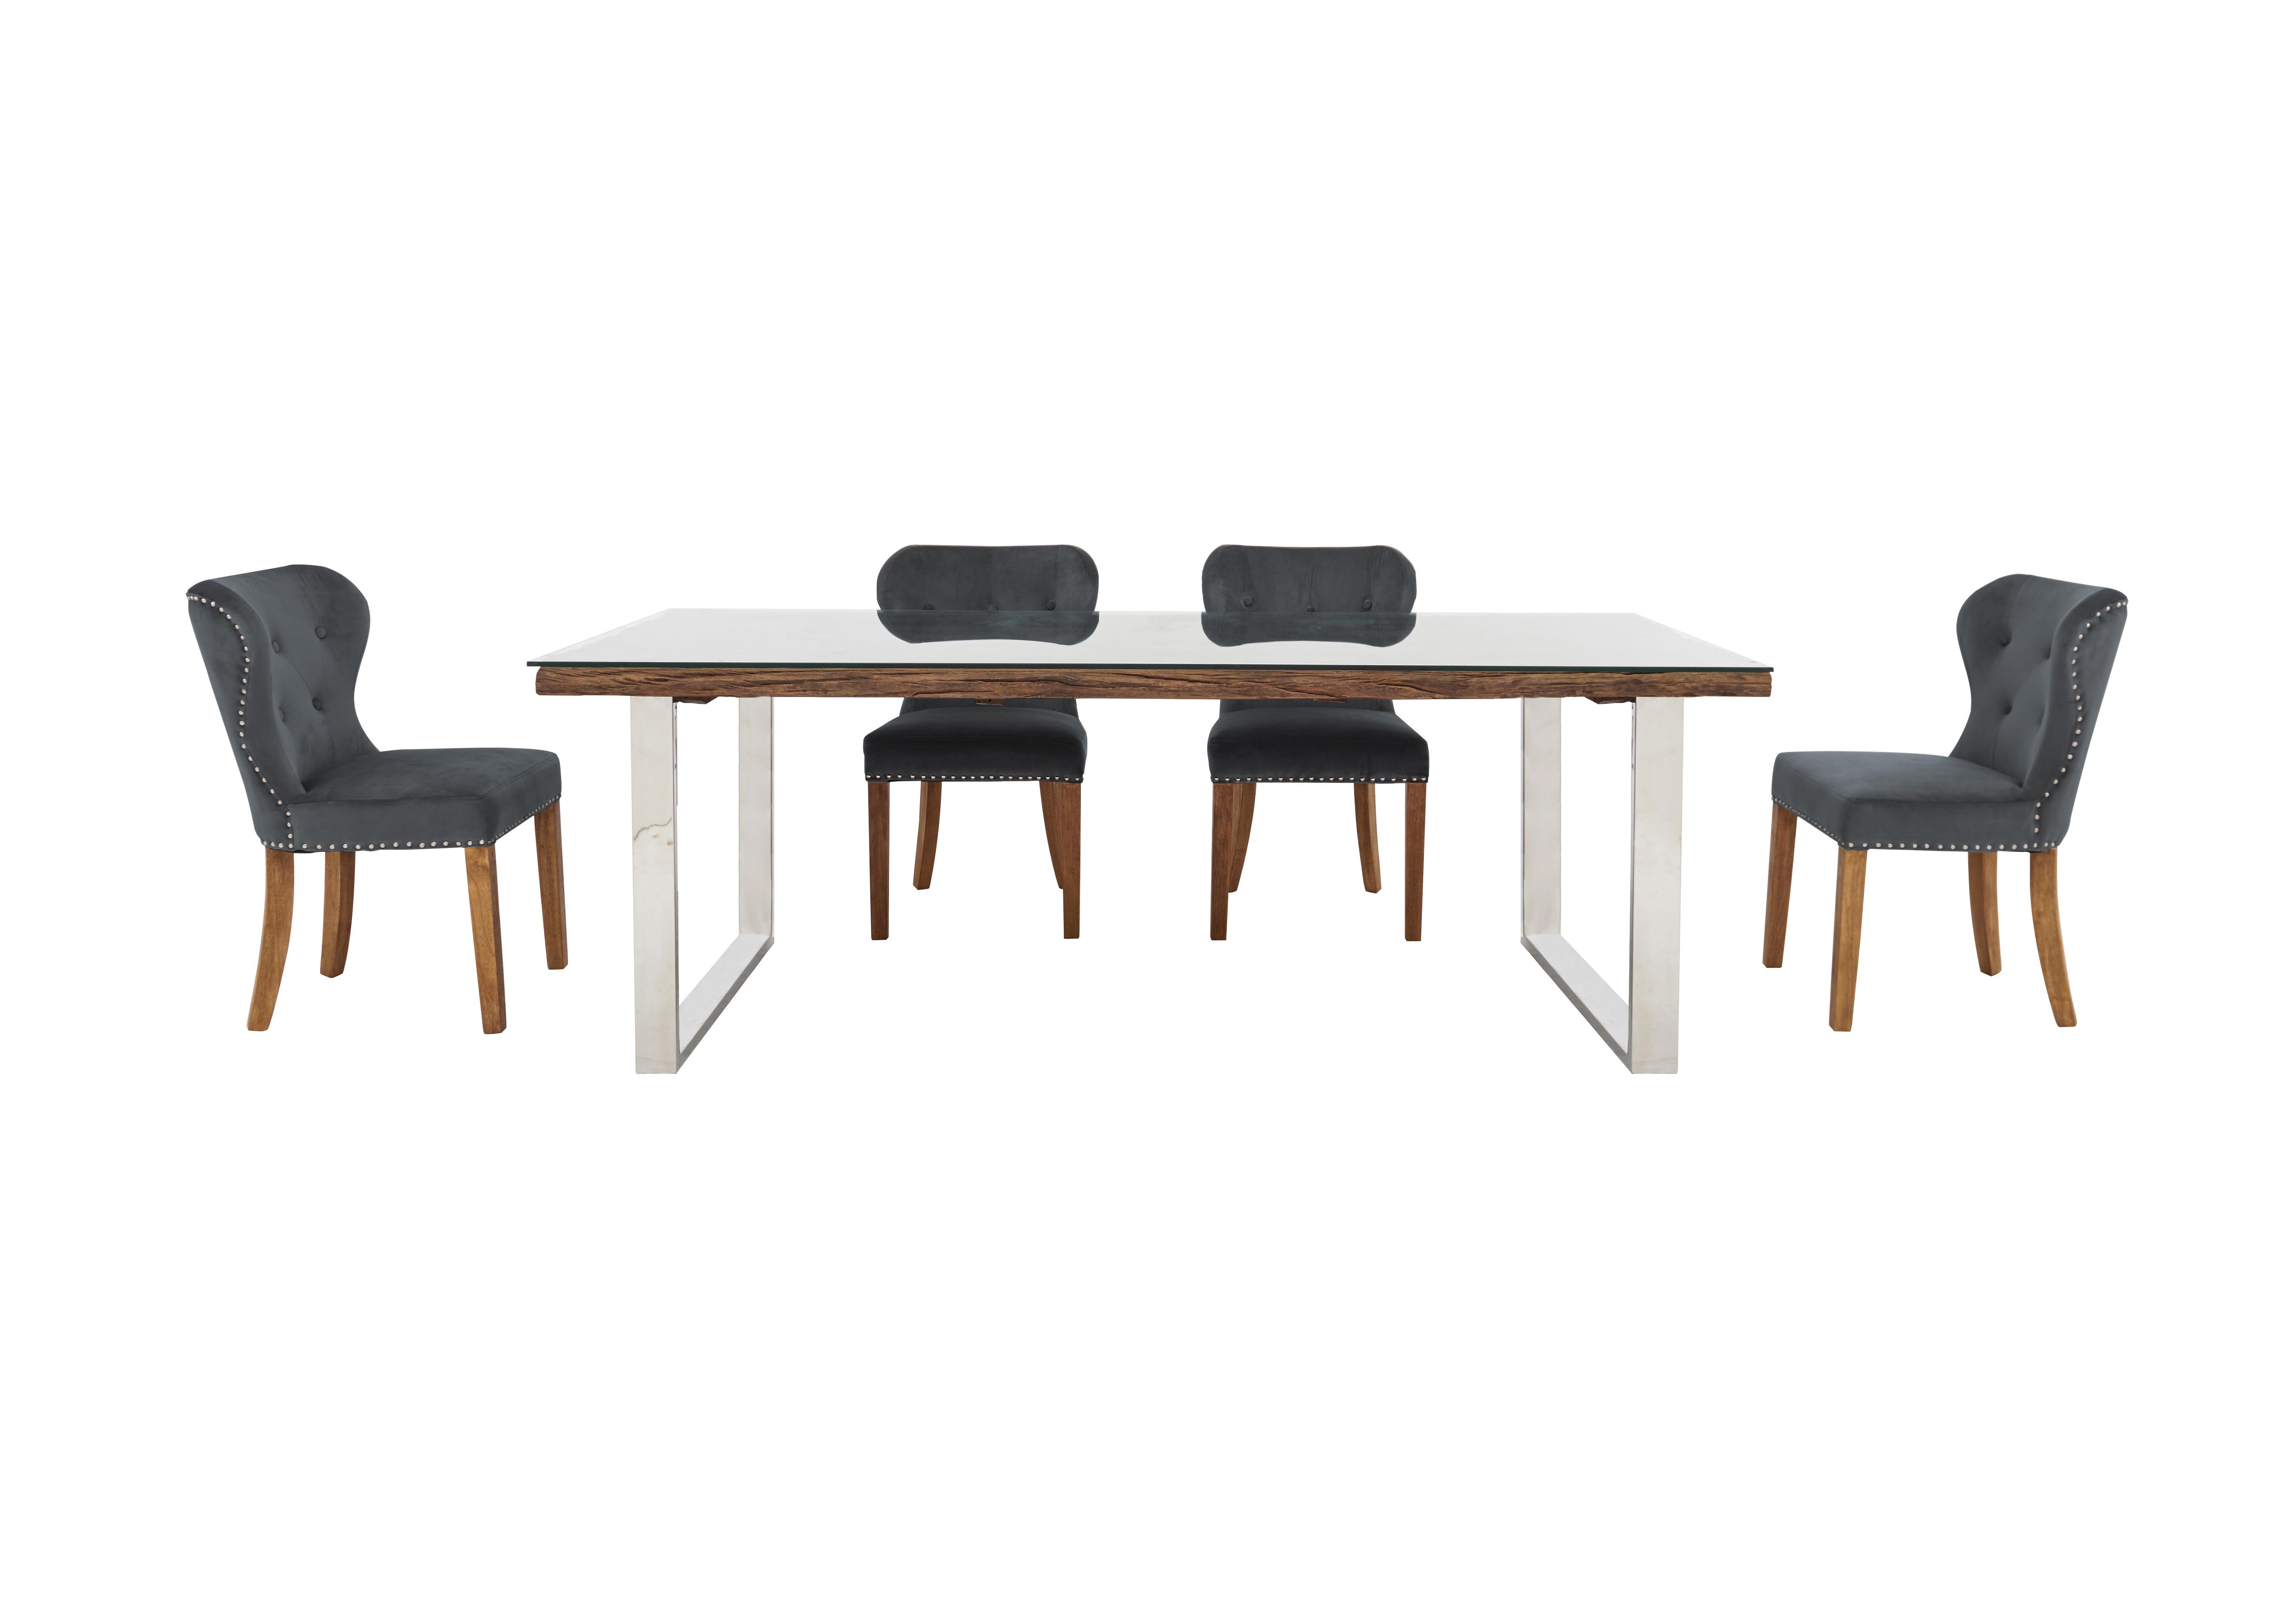 Chennai Dining Table with U-Shaped Legs and 4 Upholstered Chairs in Grey Chairs on Furniture Village